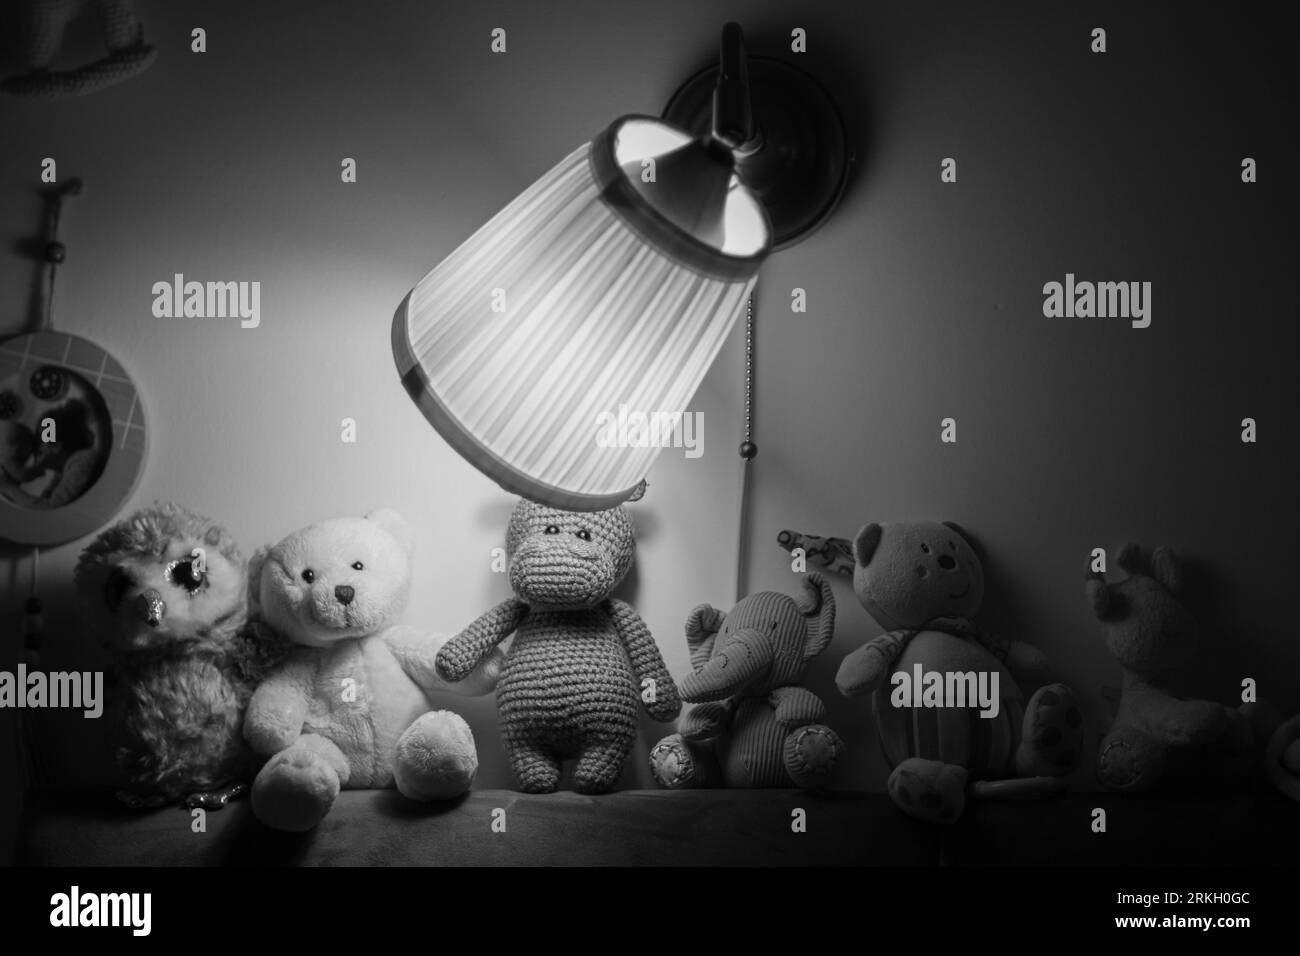 An arrangement of stuffed animals gathered around a desk illuminated by a warm light in grayscale Stock Photo